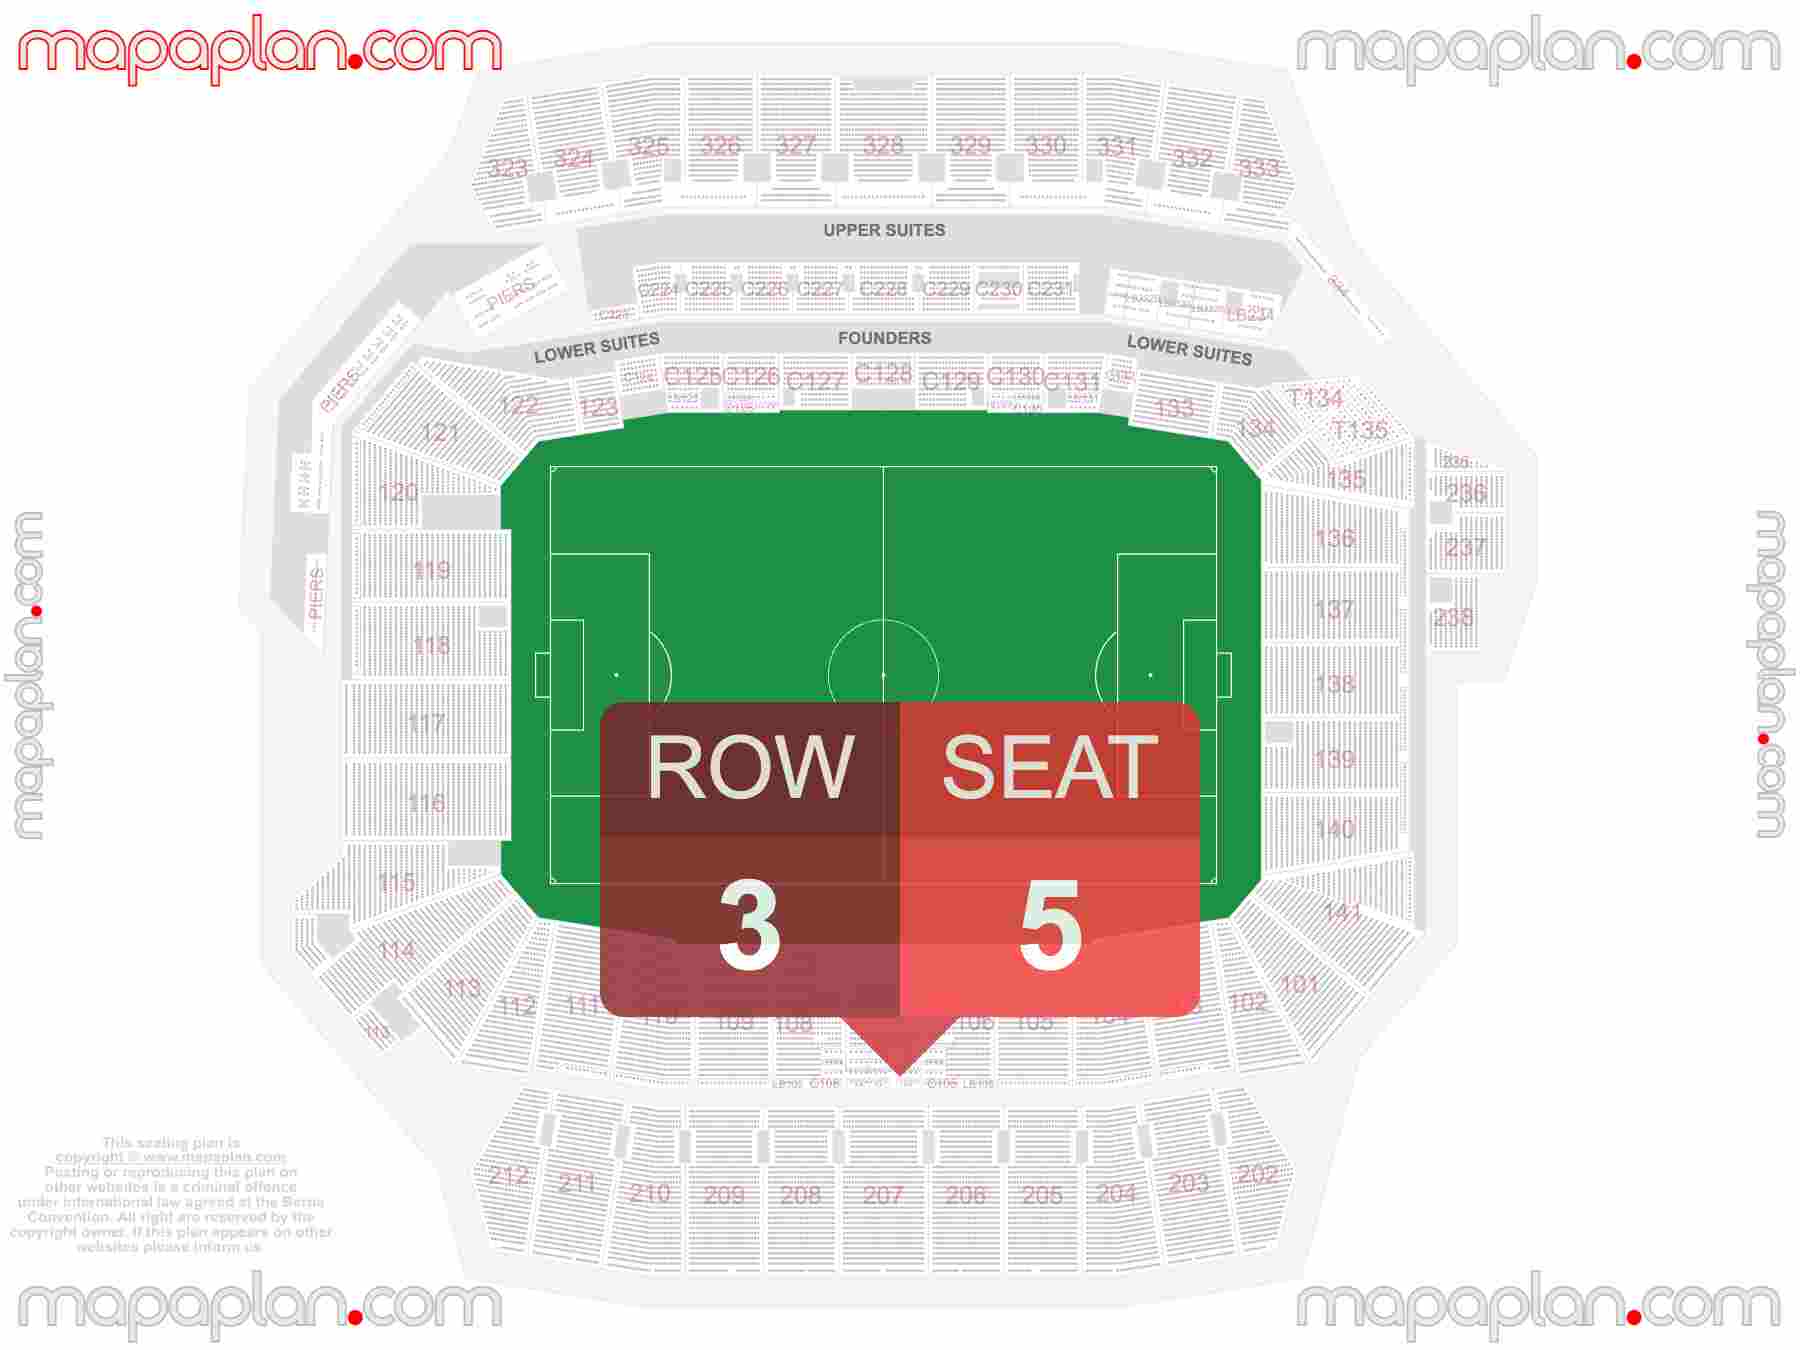 San Diego Snapdragon Stadium seating chart San Diego FC soccer inside capacity view arrangement plan - Interactive virtual 3d best seats & rows detailed stadium image configuration layout